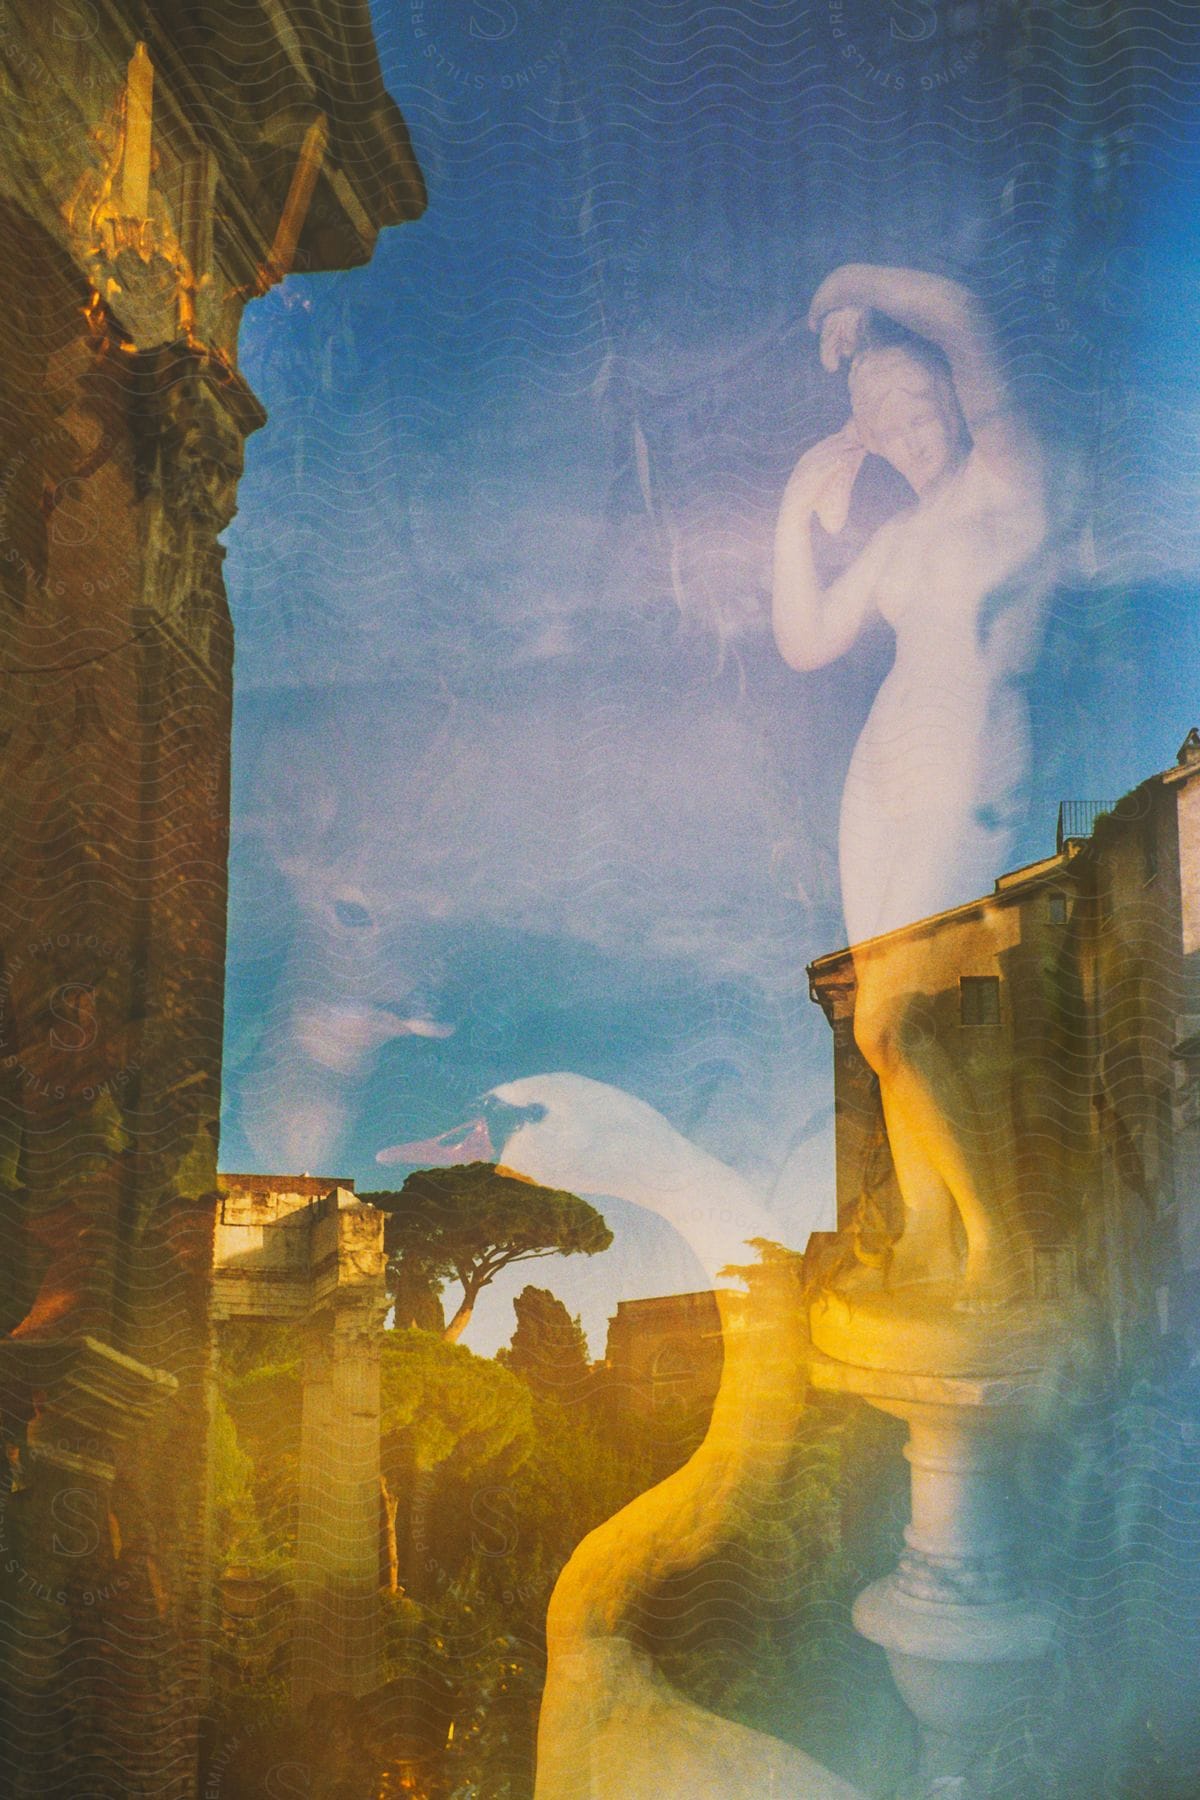 A classical style city street, seen through a glass reflecting statues of a woman and a swan.